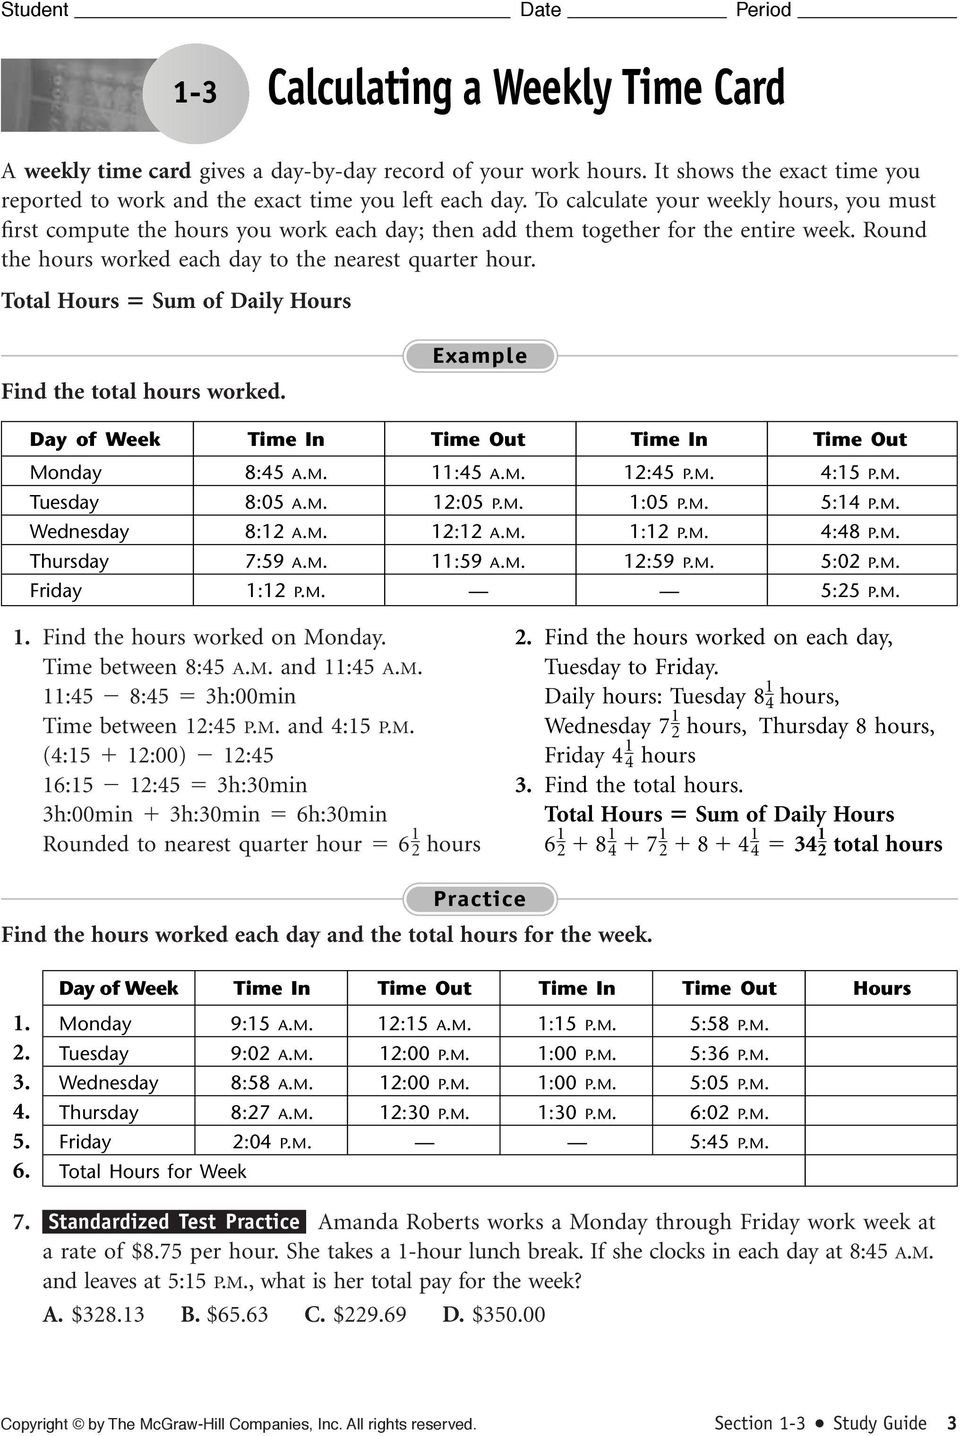 Calculating Straighttime Pay  Pdf Or Section 1 3 Weekly Time Card Worksheet Answers